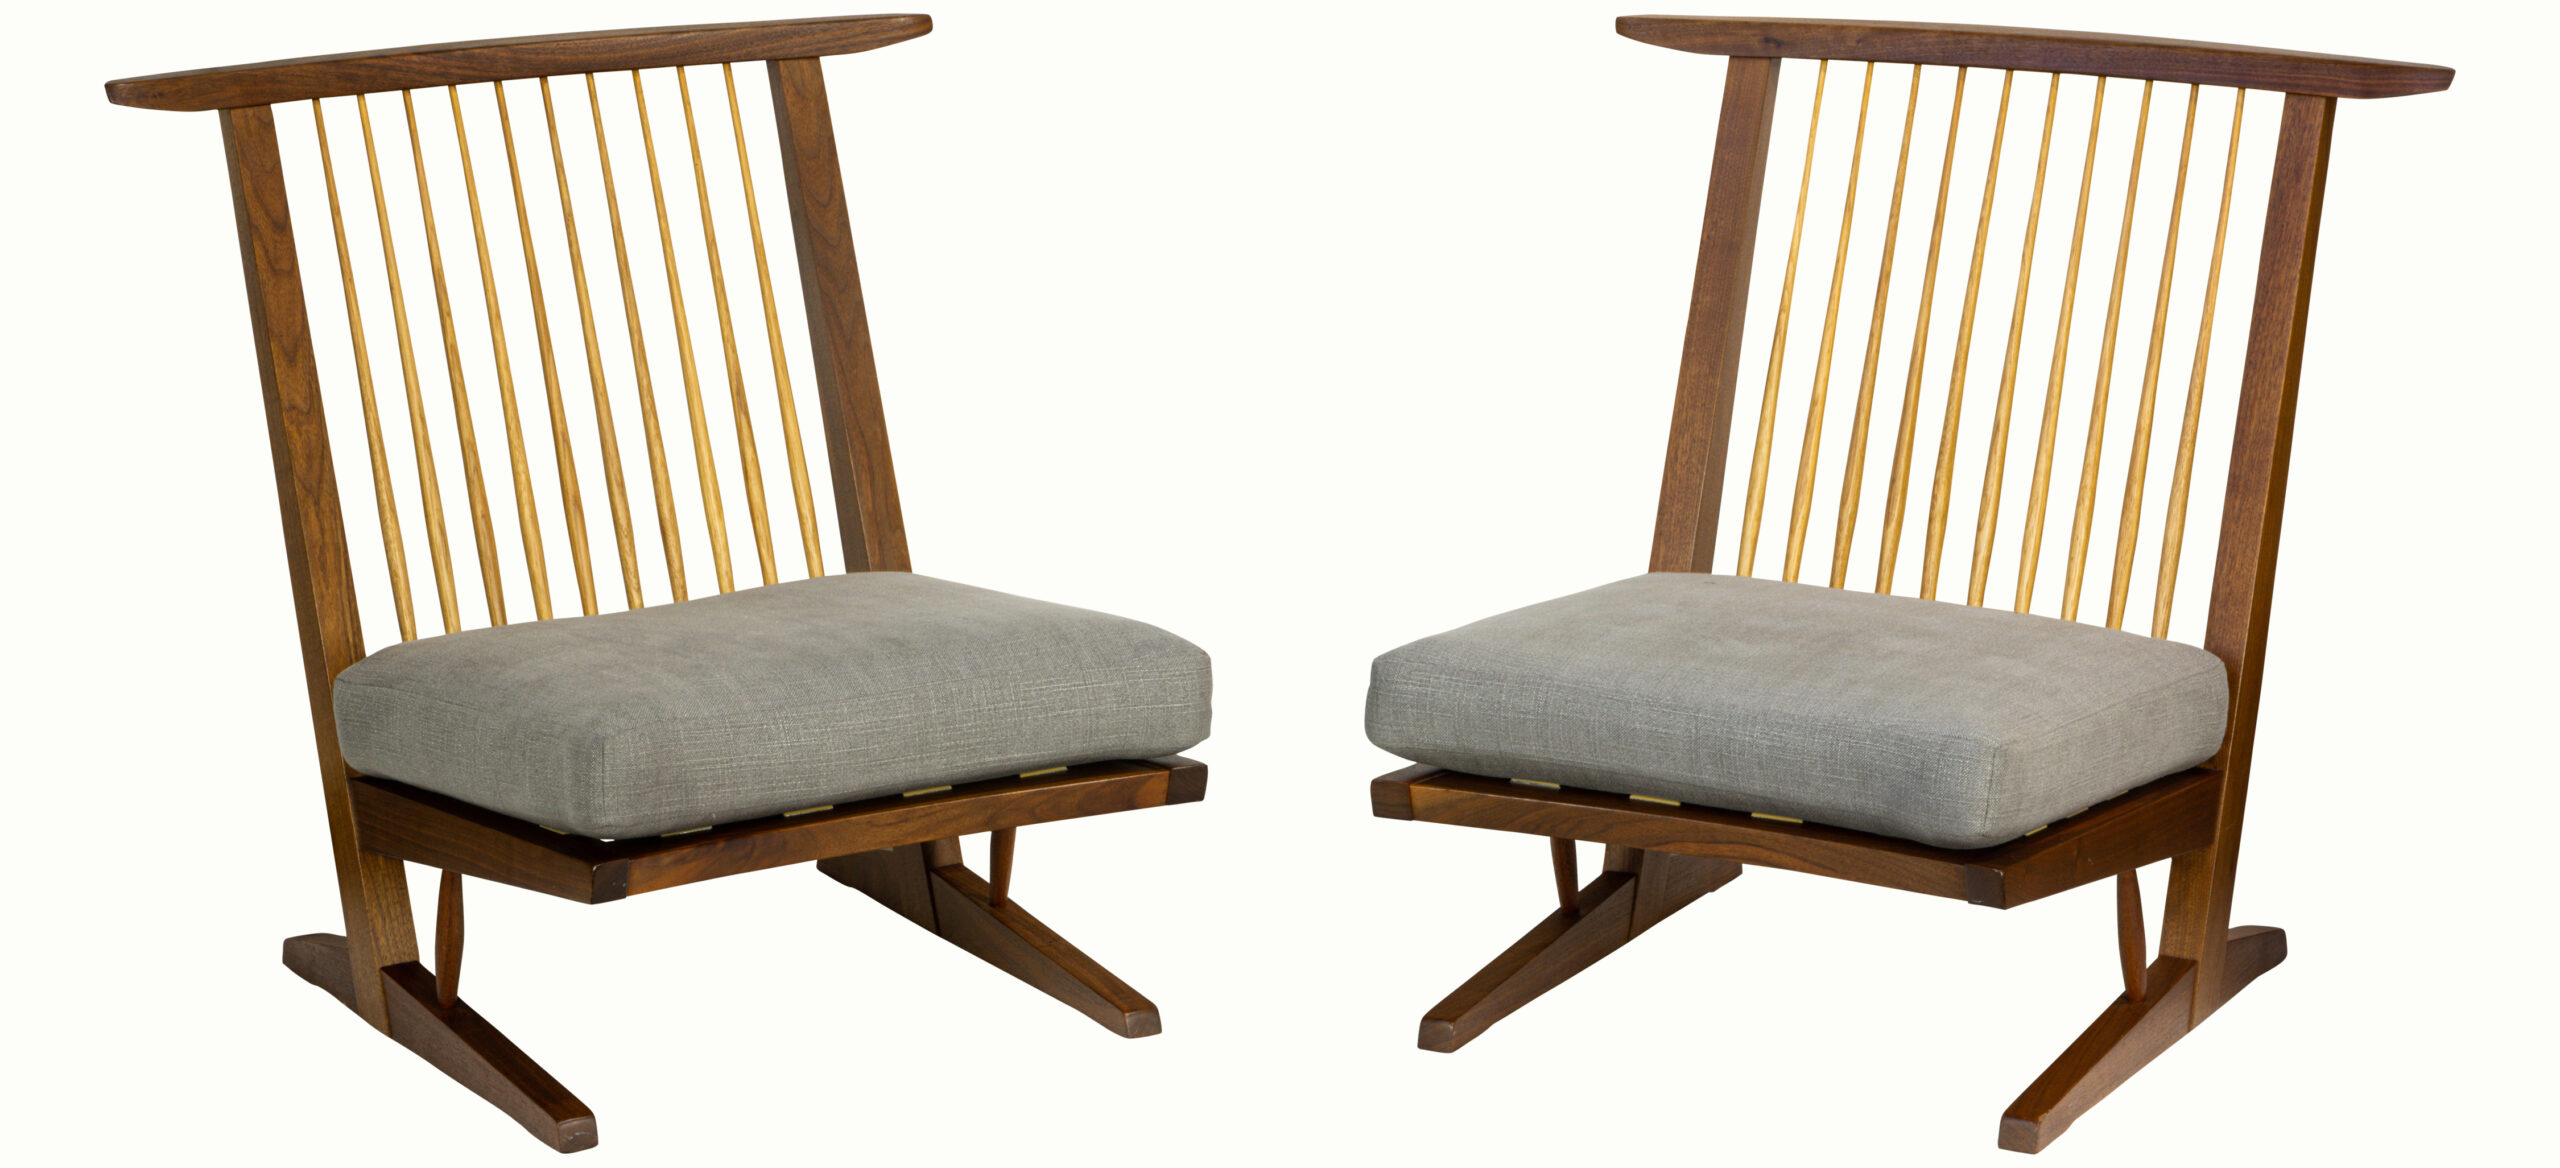 A pair of Mira Nakashima walnut Conold Cushion chairs with a copy of the original order card.